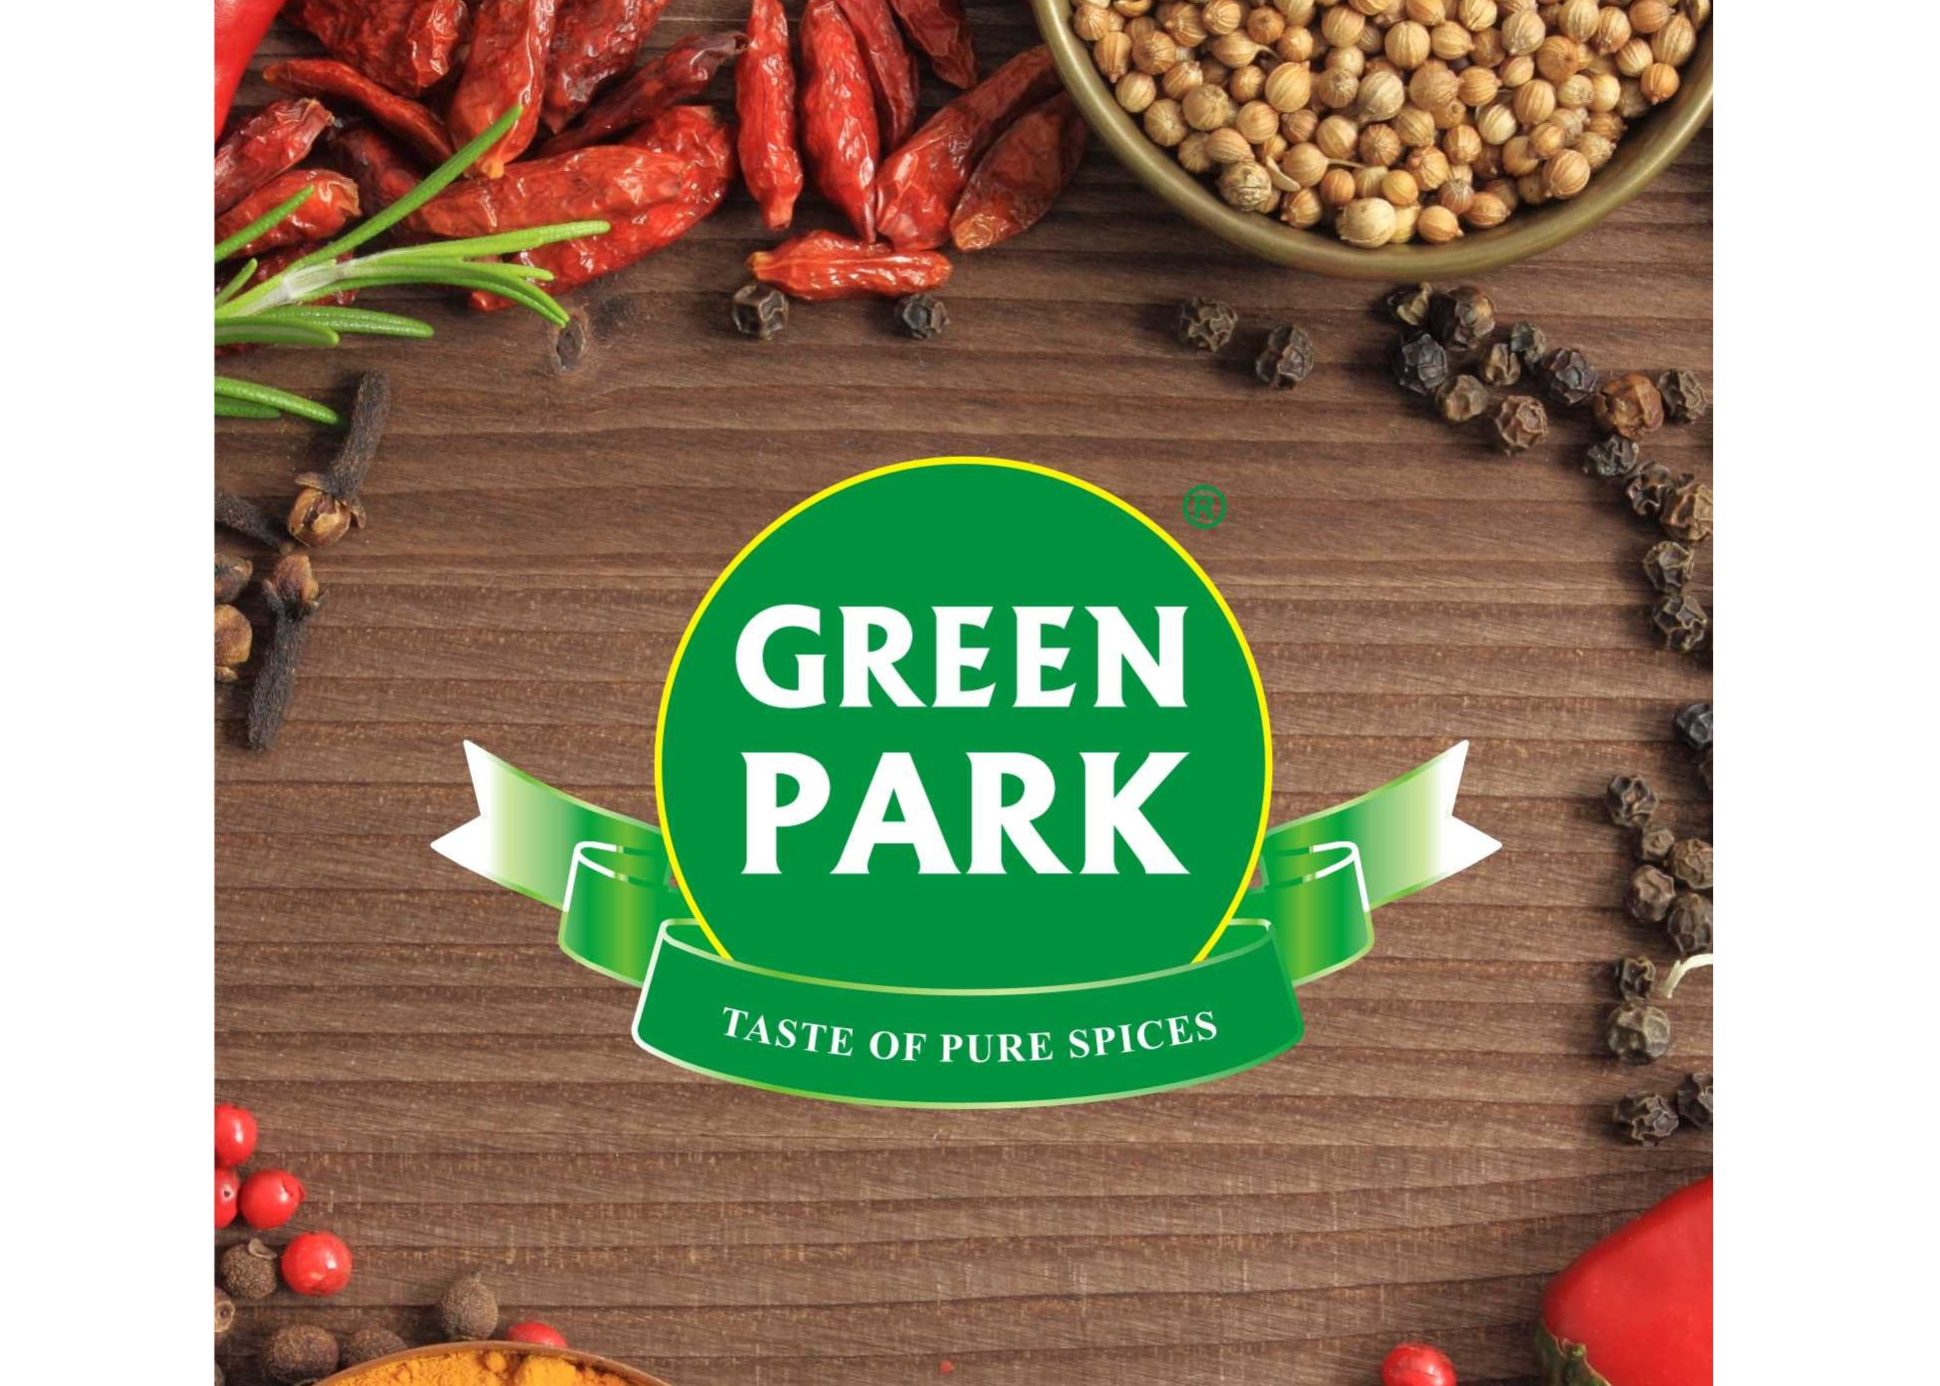 GREENPARK SPICES BROCHURE SMALL FILE Page 1 1940x1386 